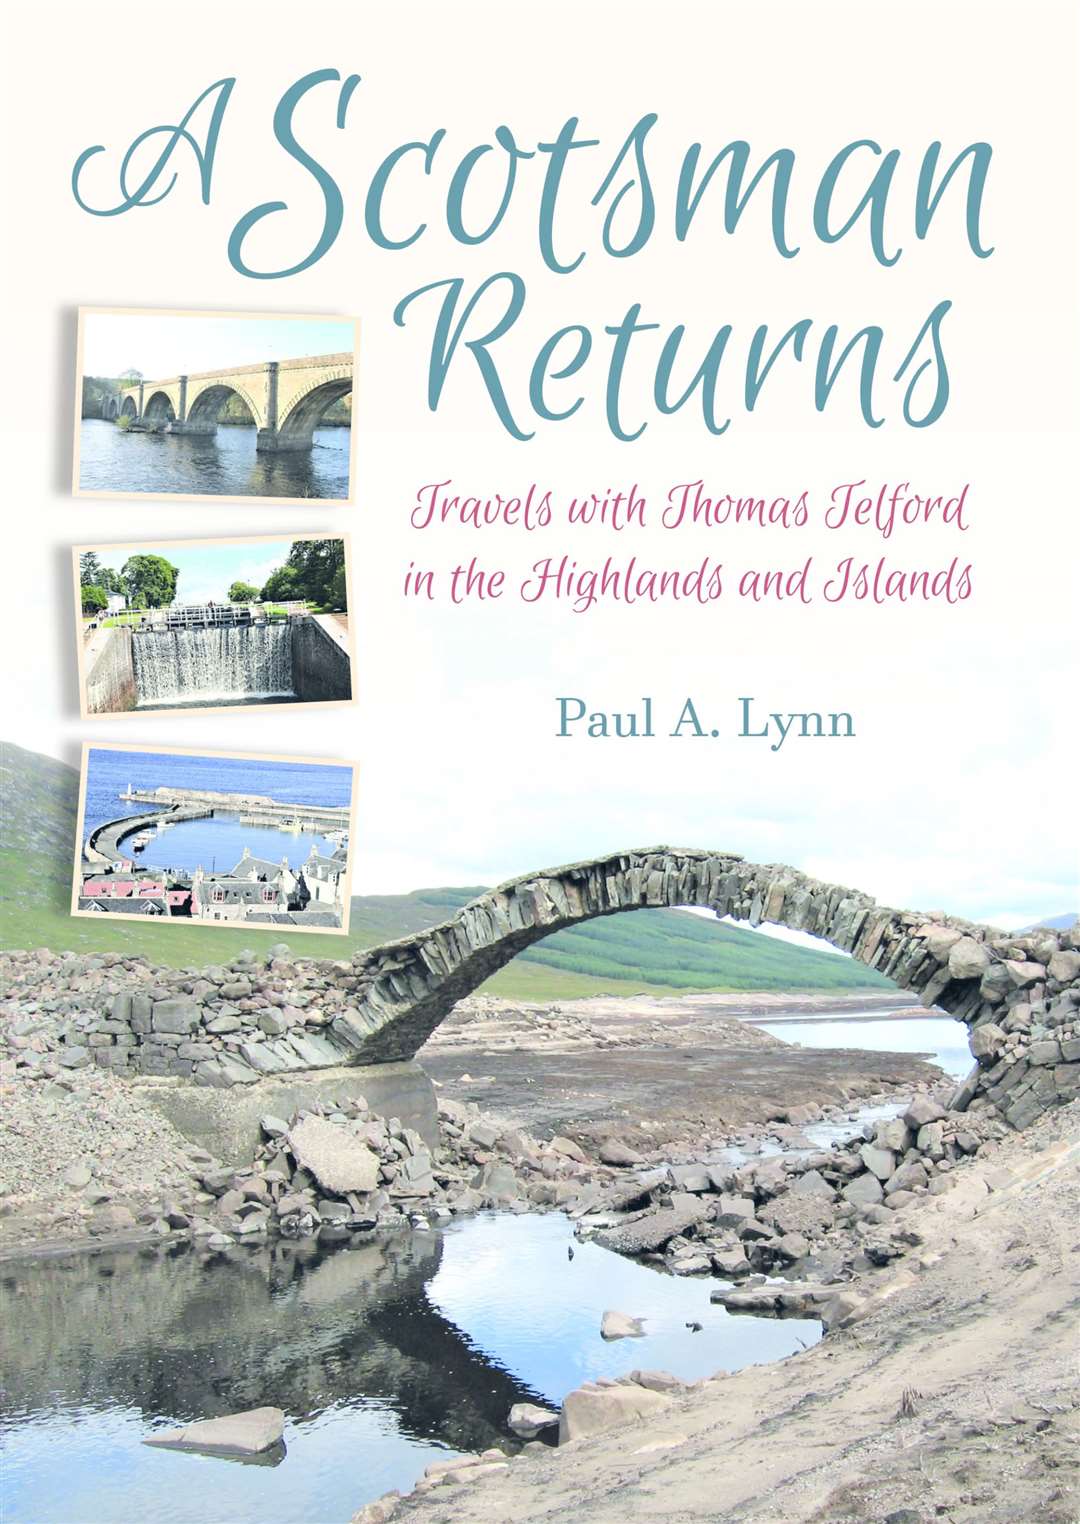 Cover design for A Scotsman Returns: Thomas Telford in the Highlands and Islands, by Paul A Lynn (Whittles Publishing).